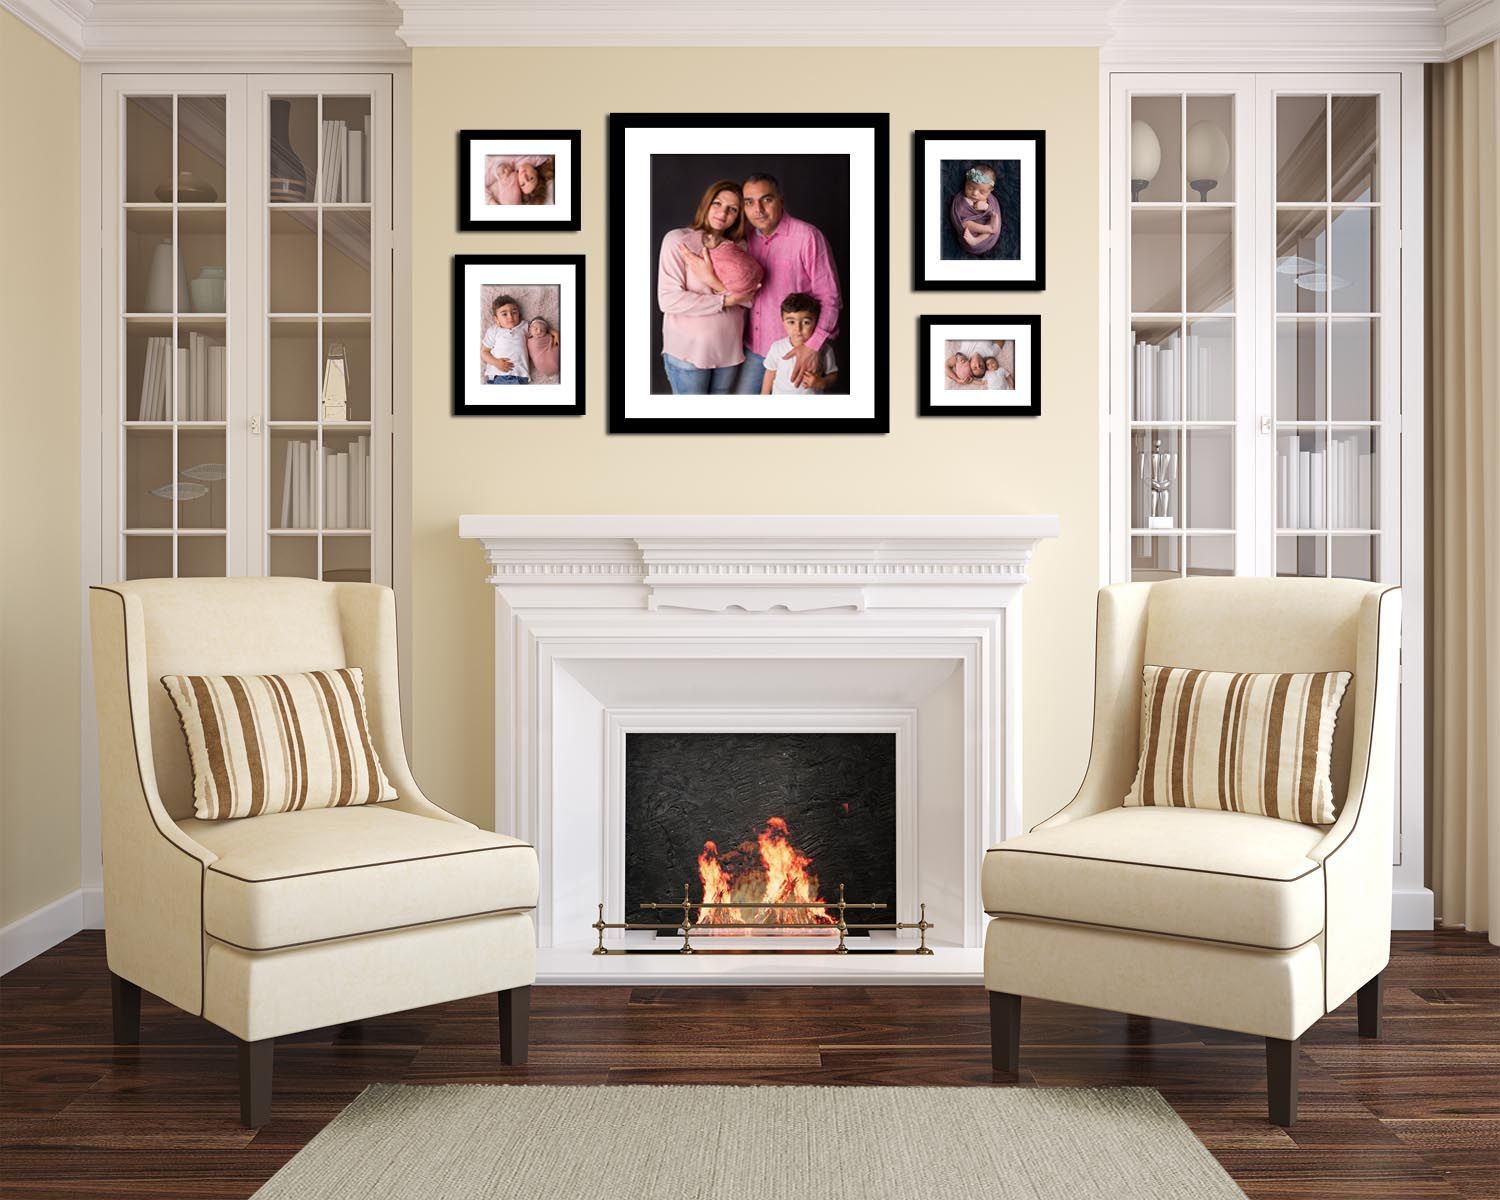 Glendale Living room with Family and Sibling newborn photos. 